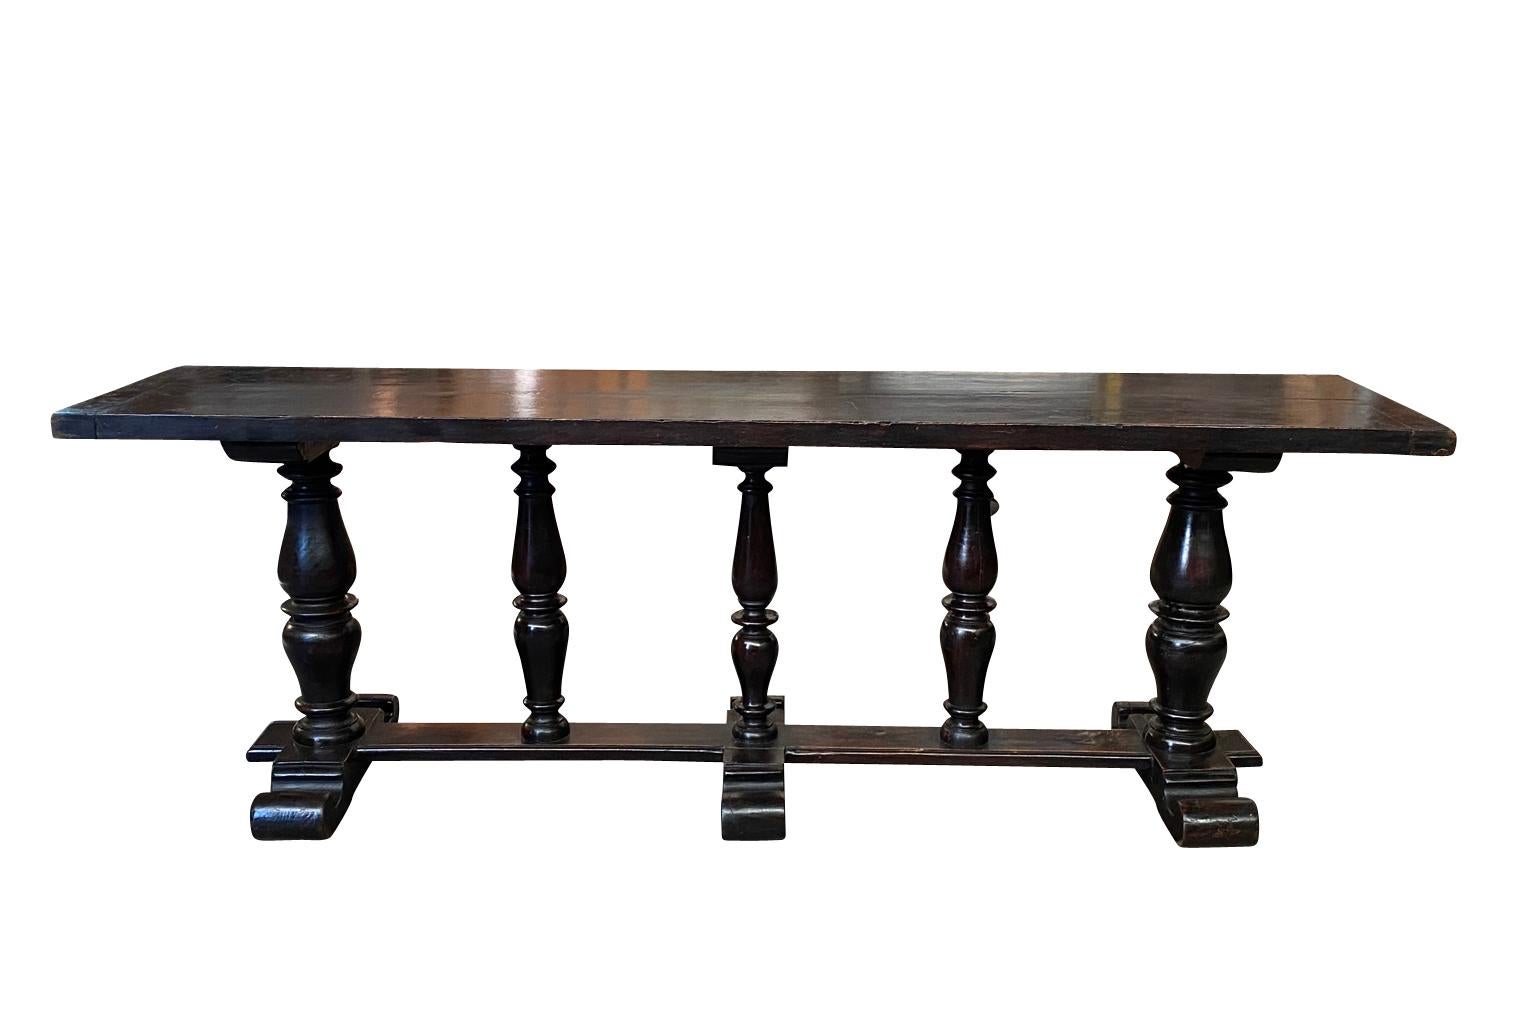 A very striking mid-19th century grand scale console table from northern Italy. Handsomely constructed from beautiful walnut in the Louis XIII style with a solid board top and wonderfully turned legs. Terrific patina.